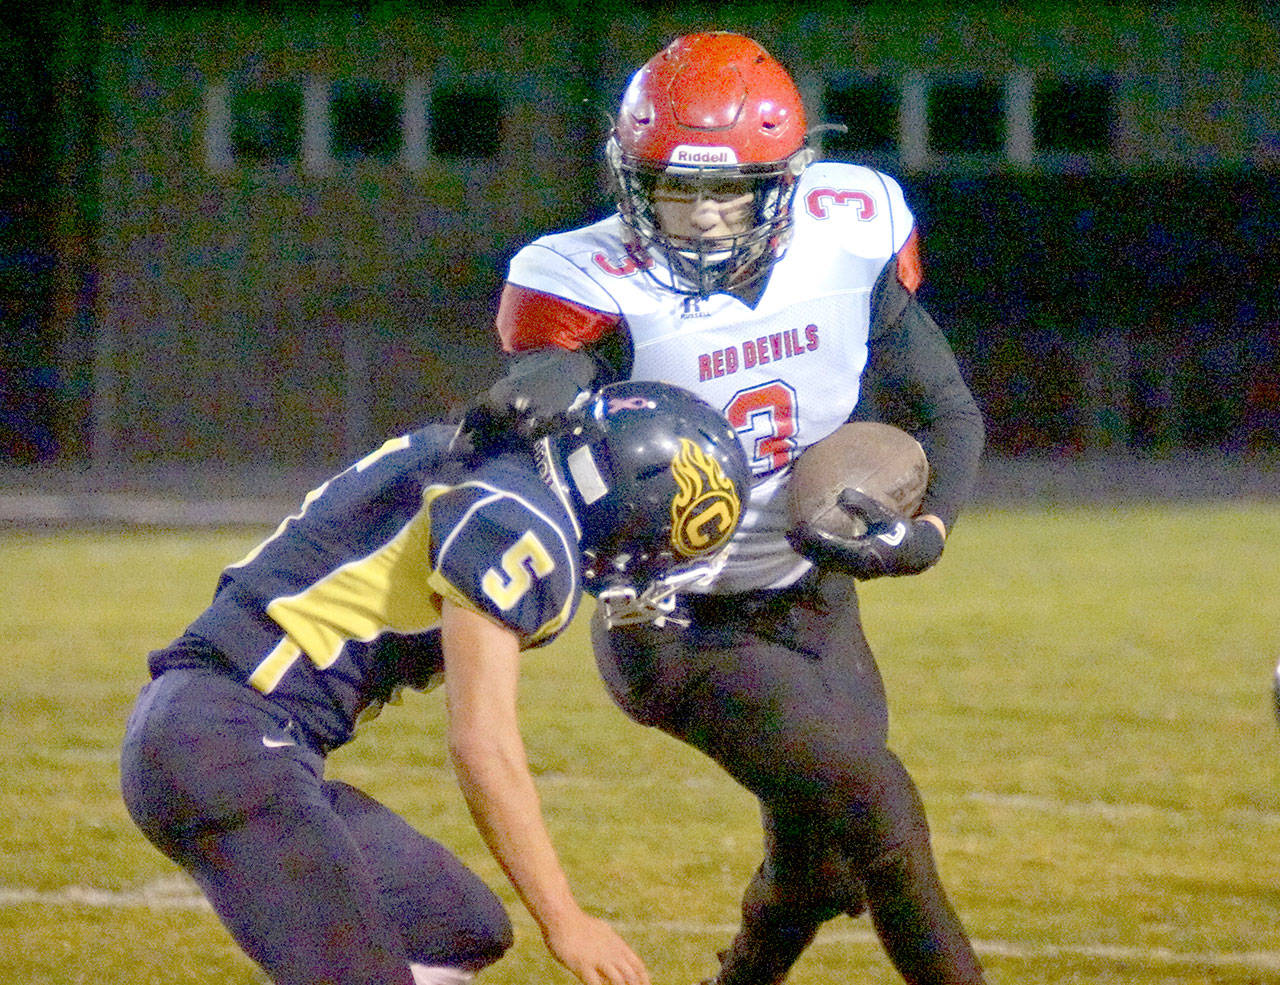 Neah Bay’s Isaiah Knaus runs against Naselle in the Red Devils’ Quad-District playoff loss. (By Robert Hilson/for Peninsula Daily News)